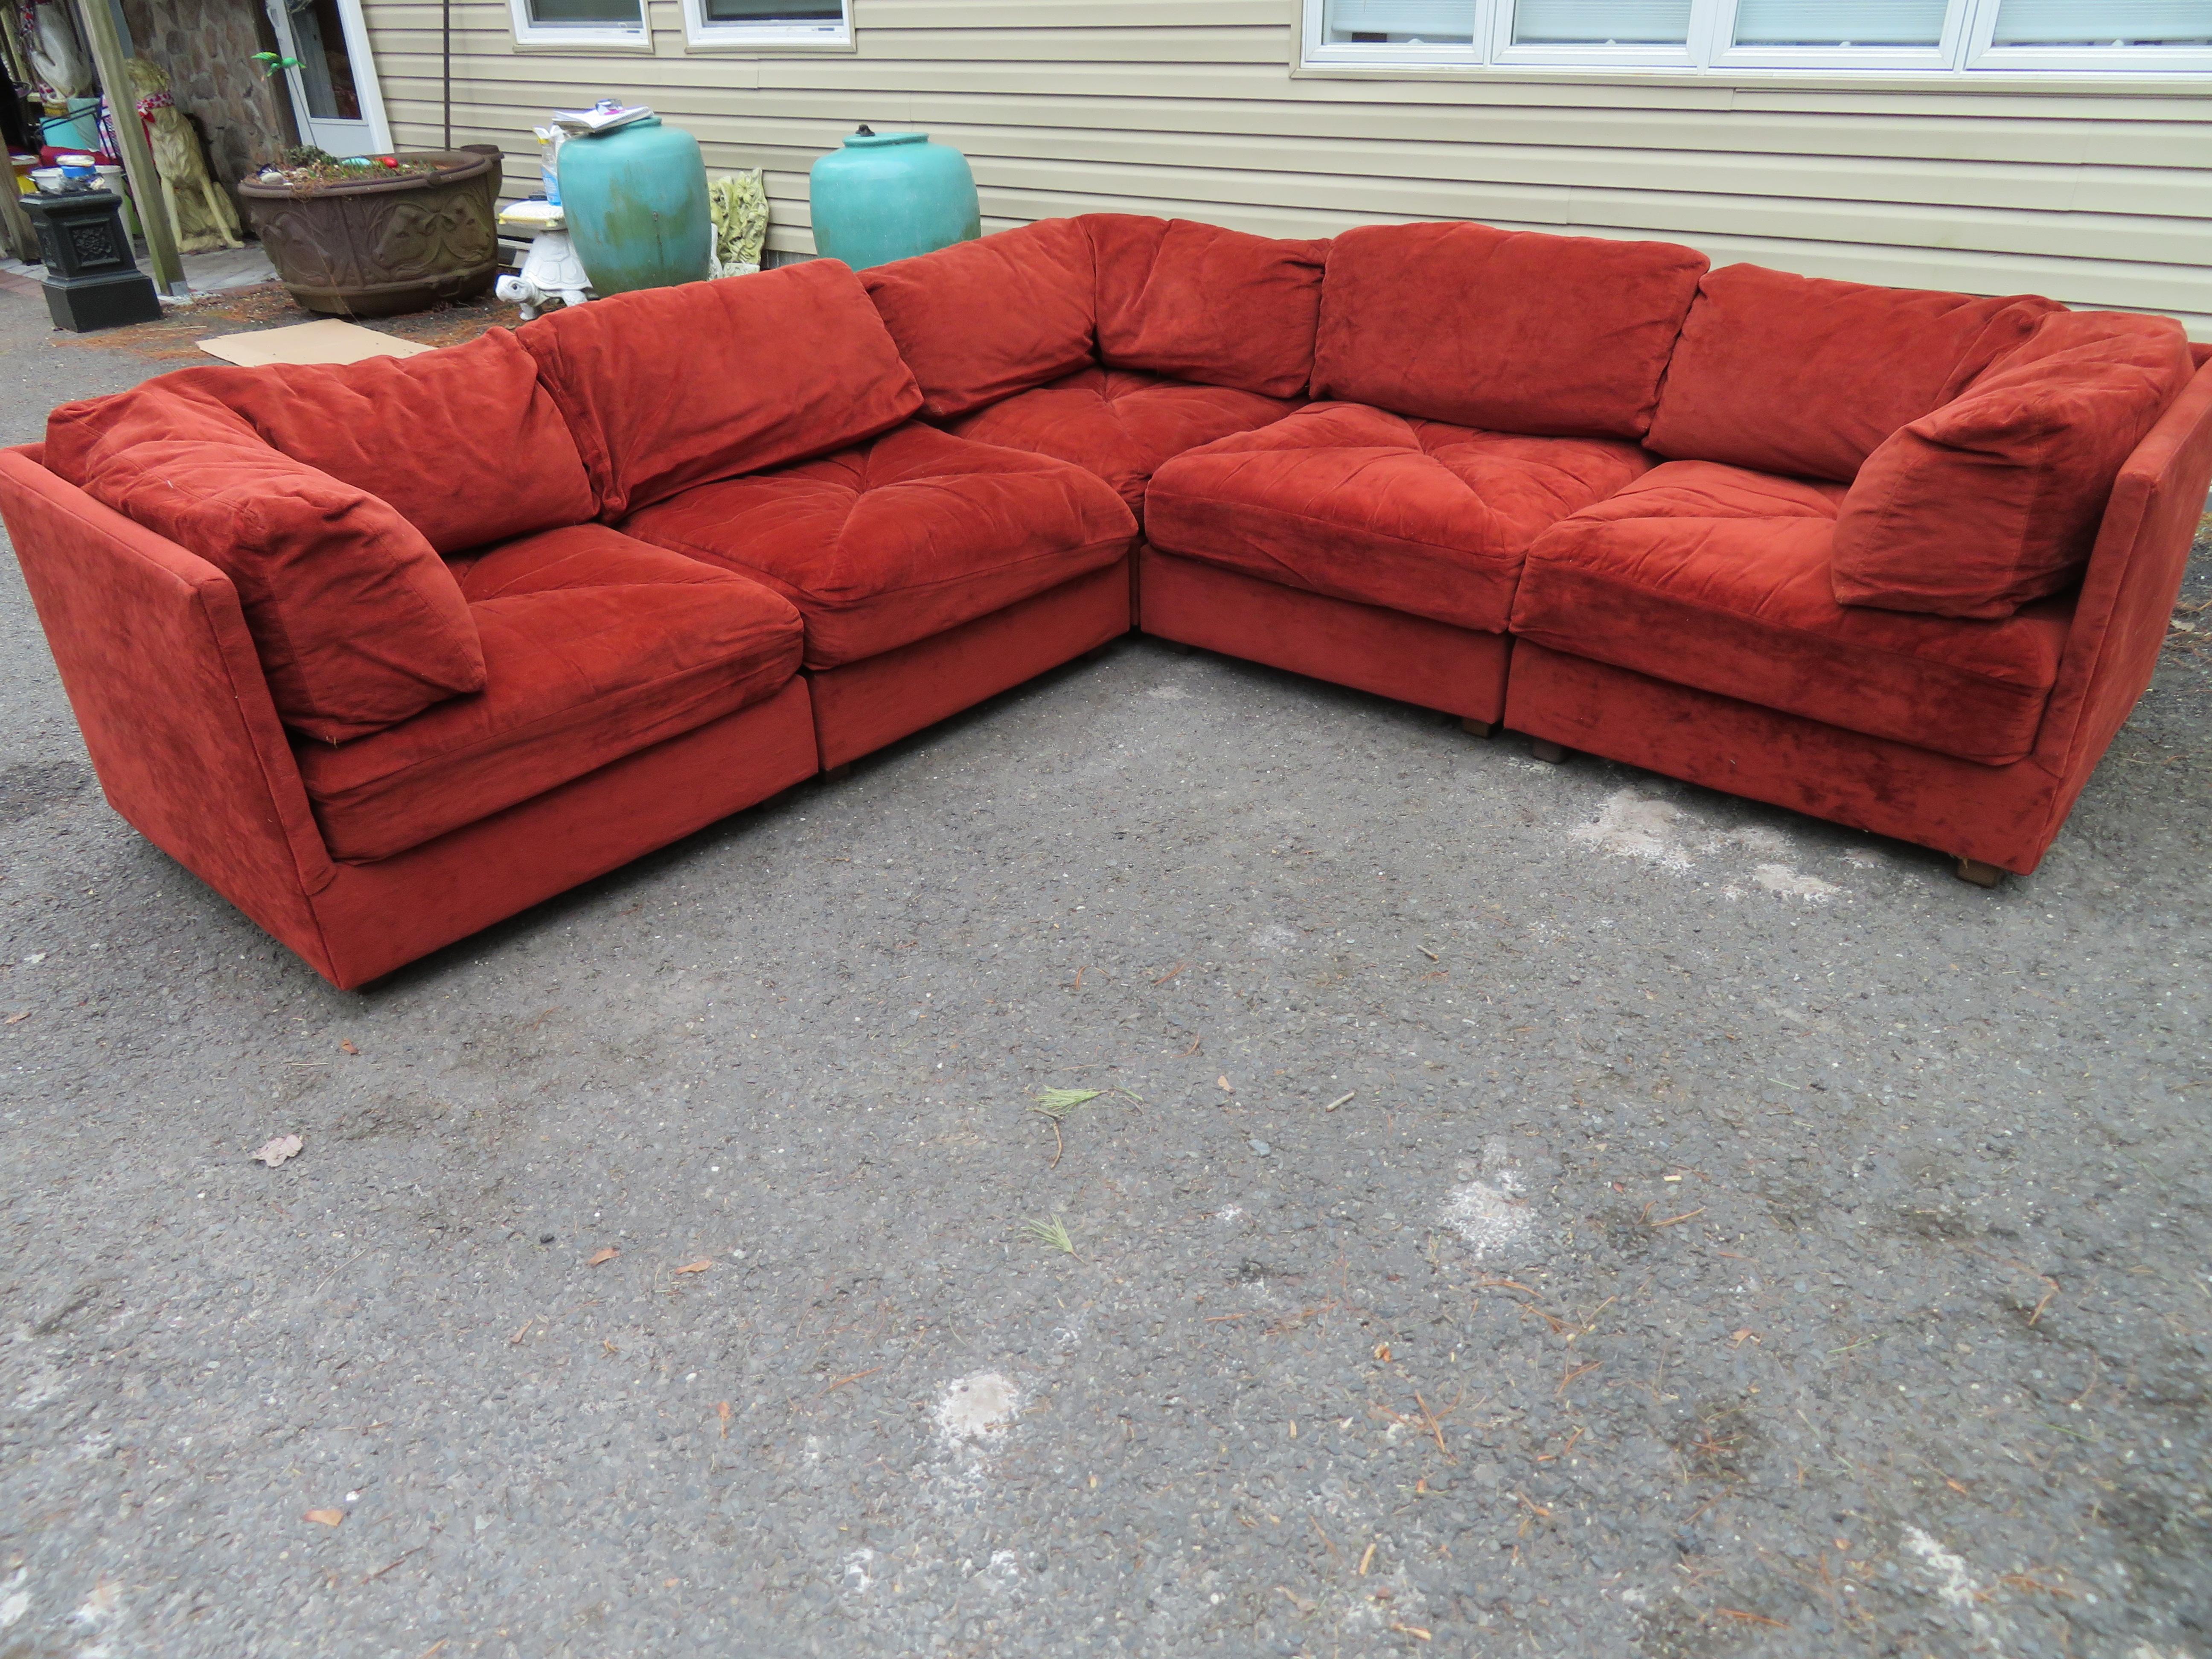 Handsome 5 Piece Milo Baughman Style Cube Sectional Selig Mid-Century Modern 8